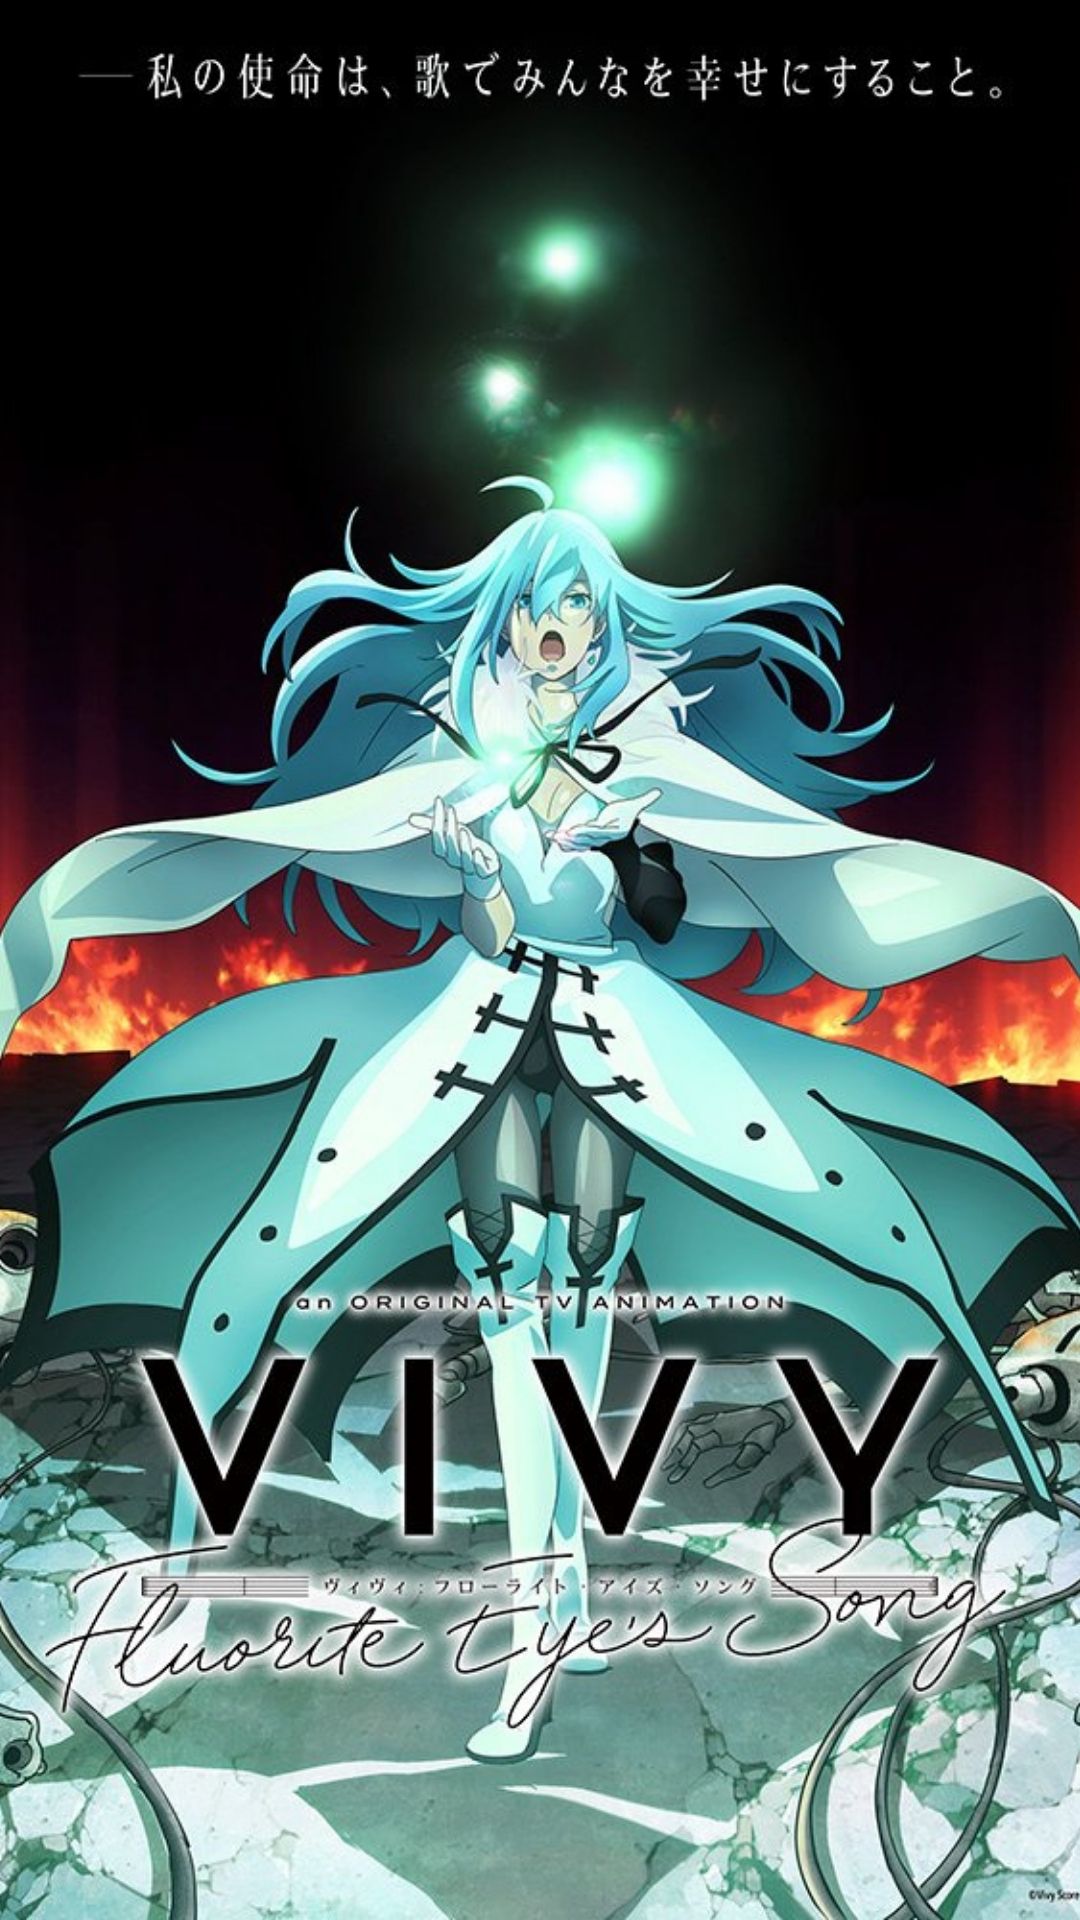 Vivy - Fluorite Eye’s Song Receives Web Manga Adaptation! Chapter 1 Released Online